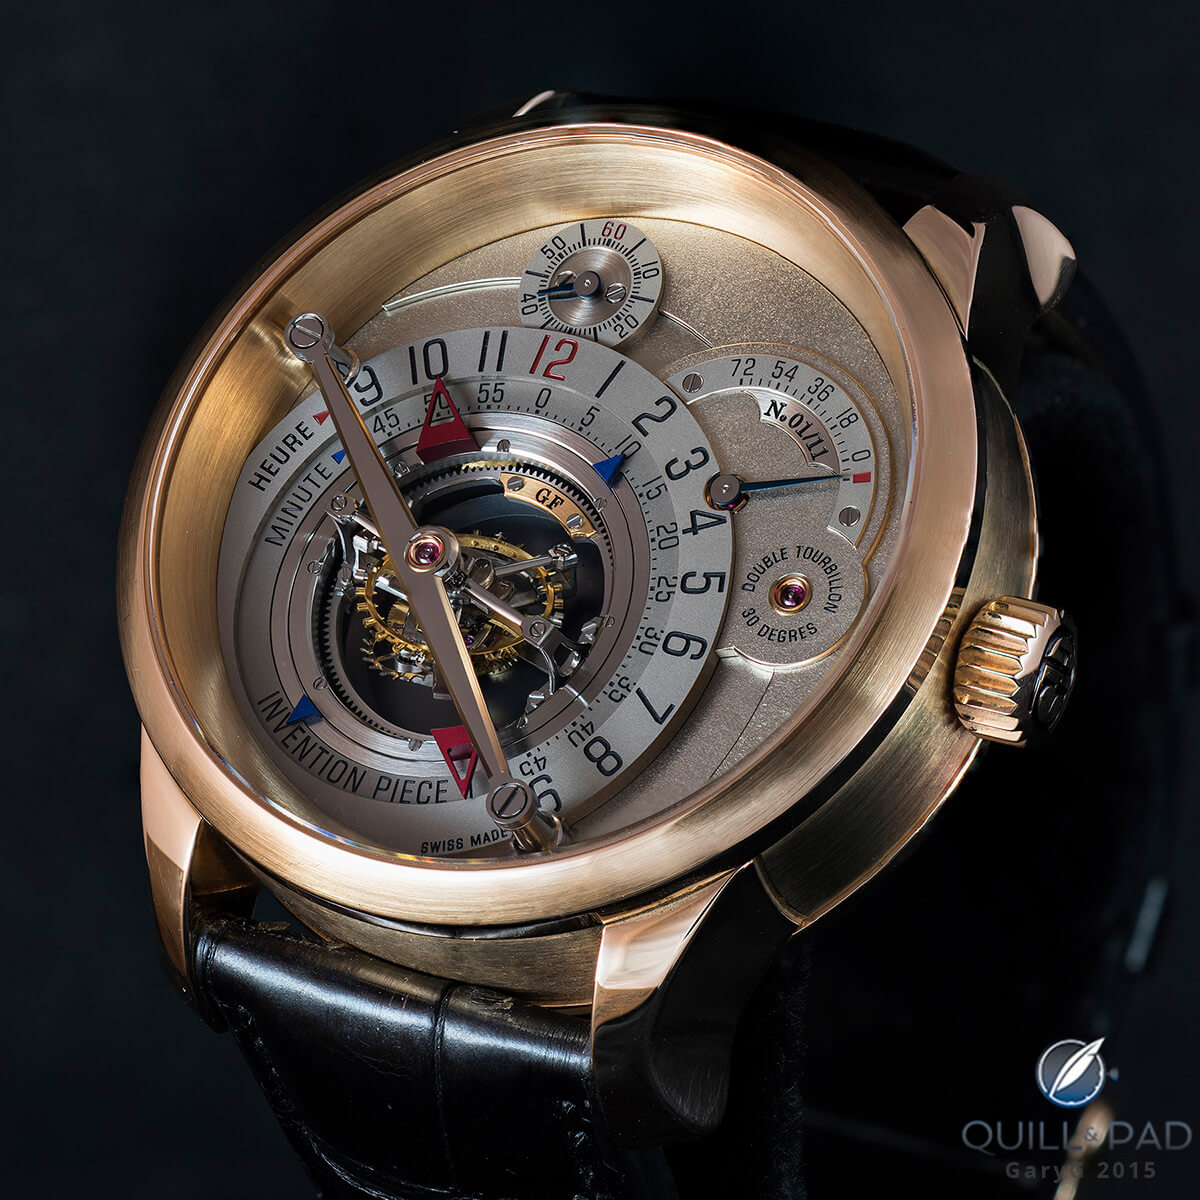 Every little thing just so: layers, shapes, and textures of the Greubel Forsey Invention Piece 1